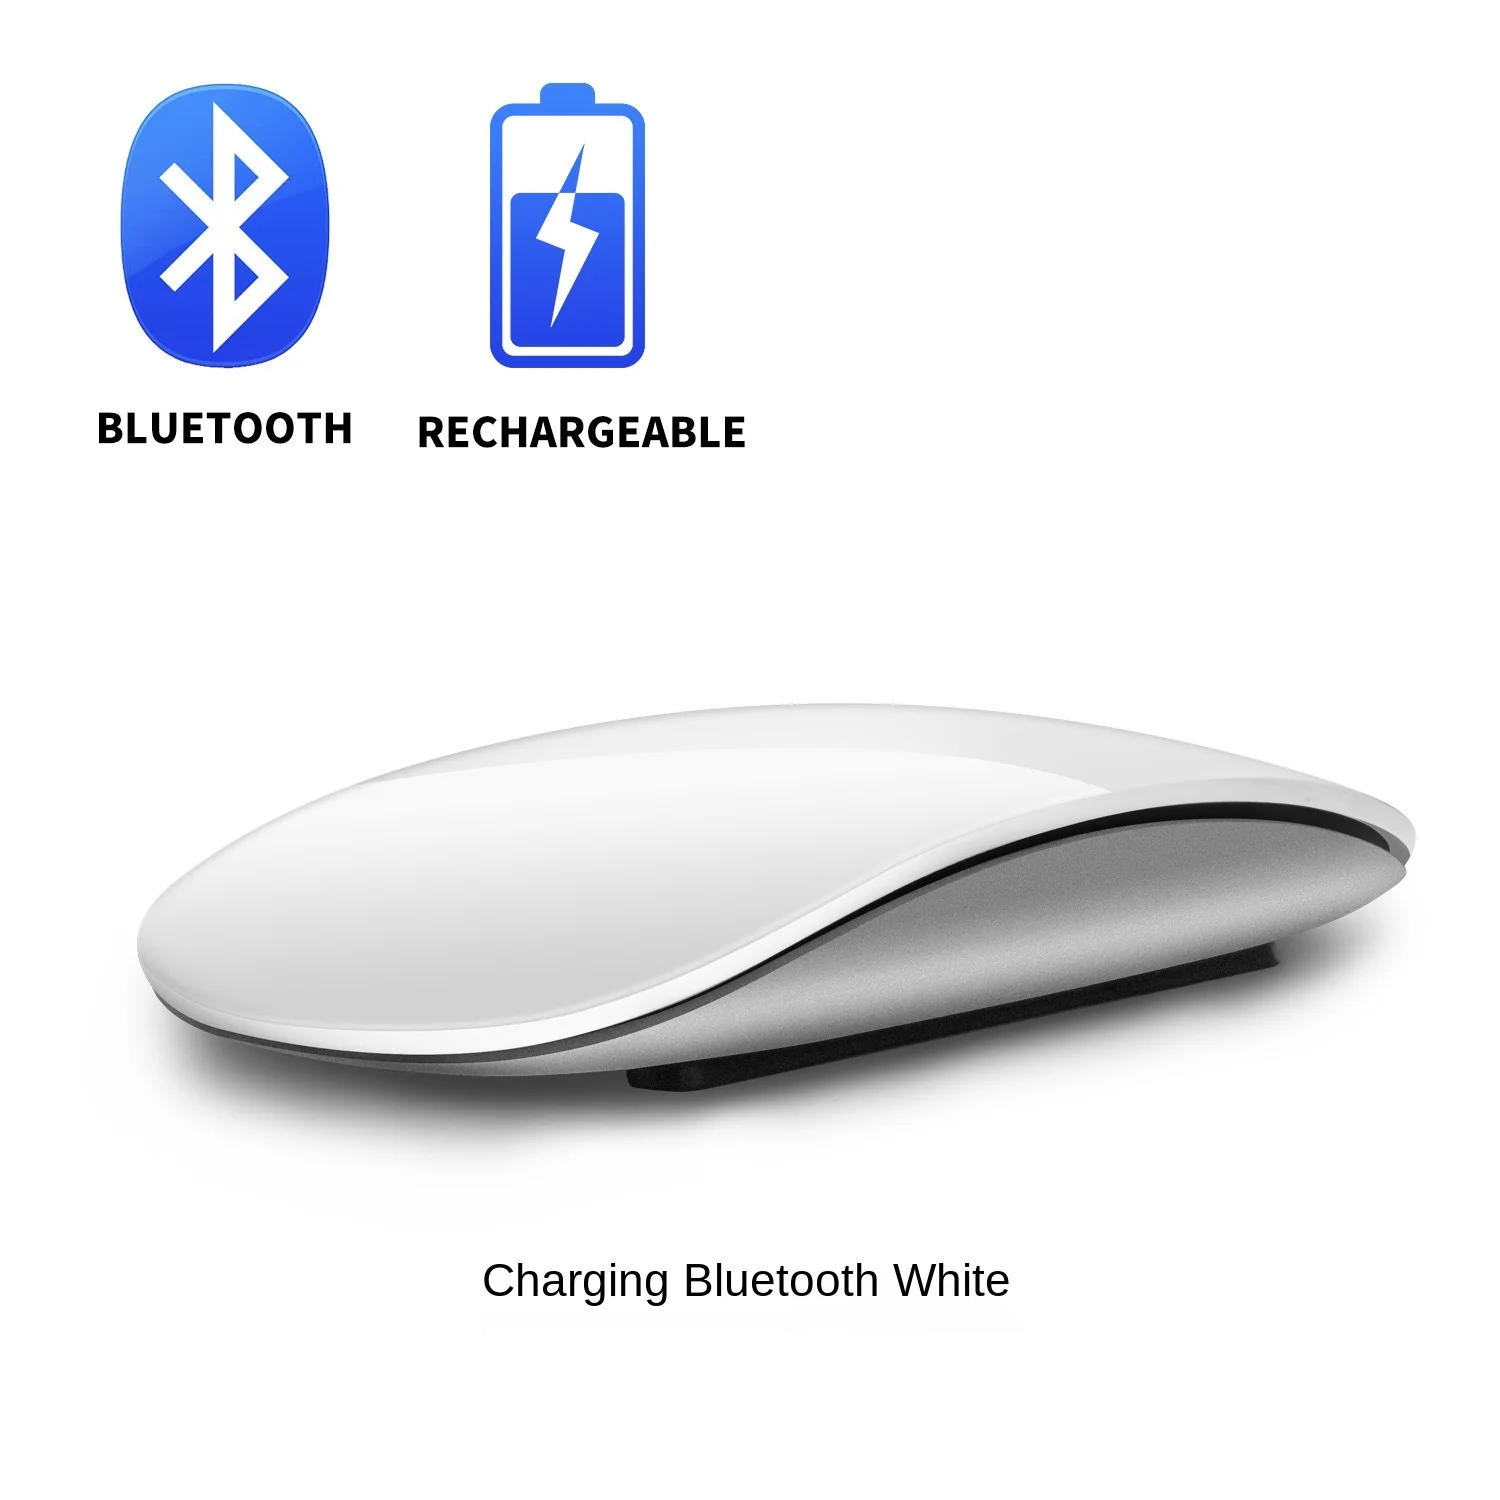 2.4G Bluetooth Wireless Mouse For Laptop Ipad Apple Style Touch Wireless Charging Bluetooth Mouse For Laptop Office wired gaming mouse